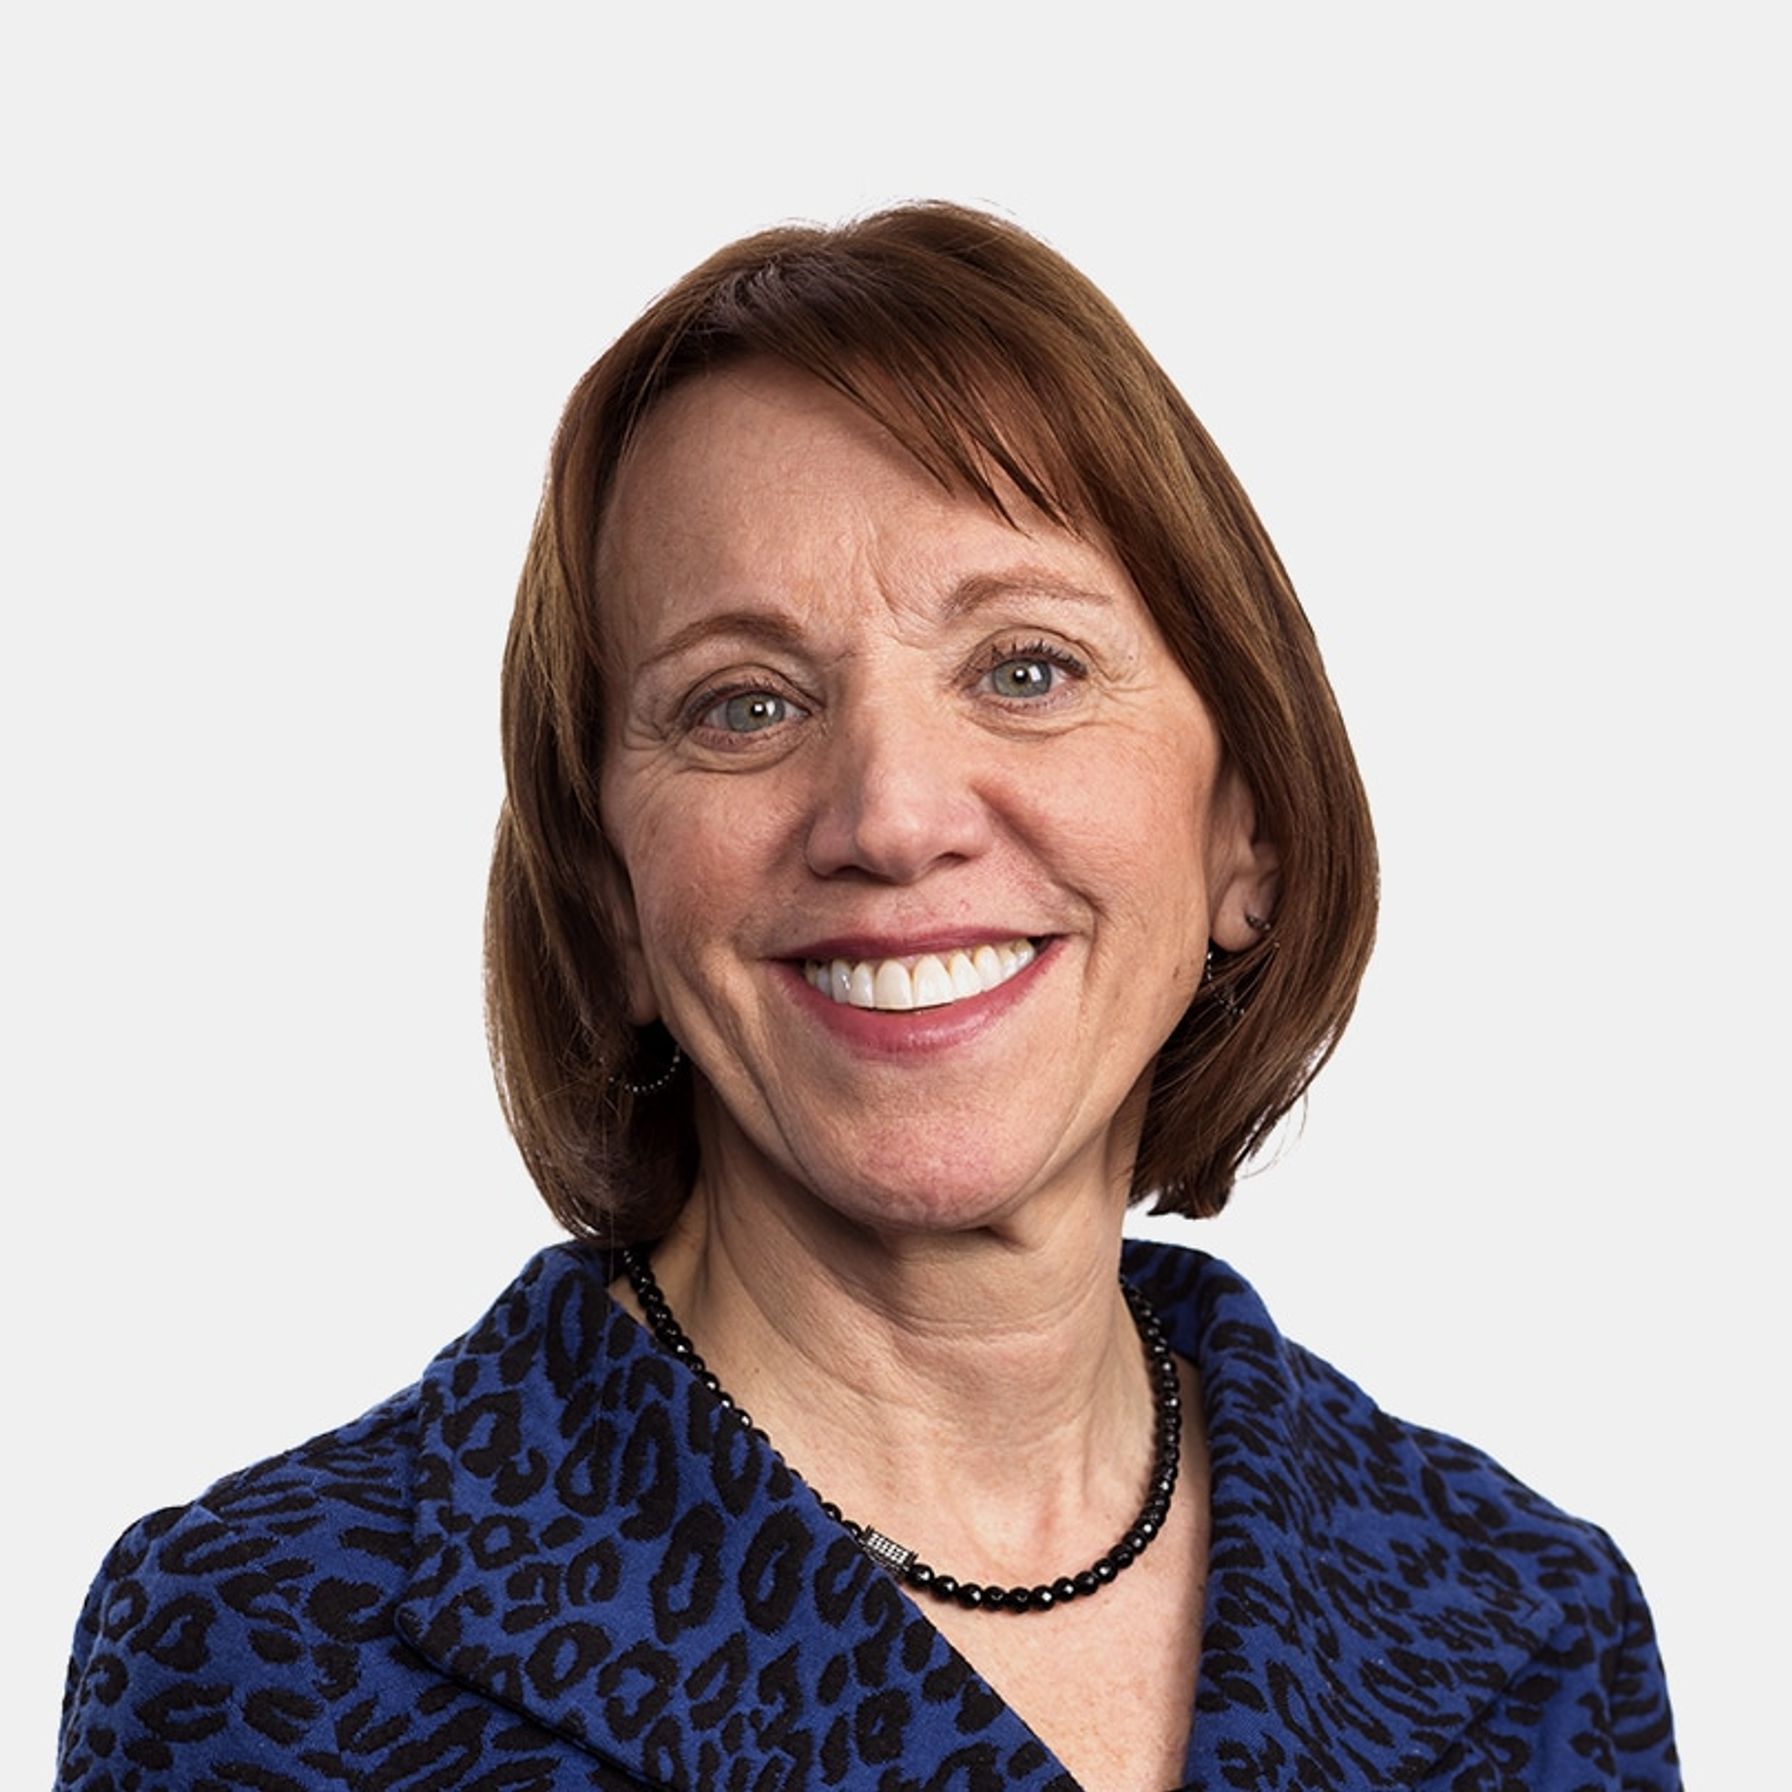 Laura Zimmerman, Executive Vice President and Chief Marketing Officer at eFinancial